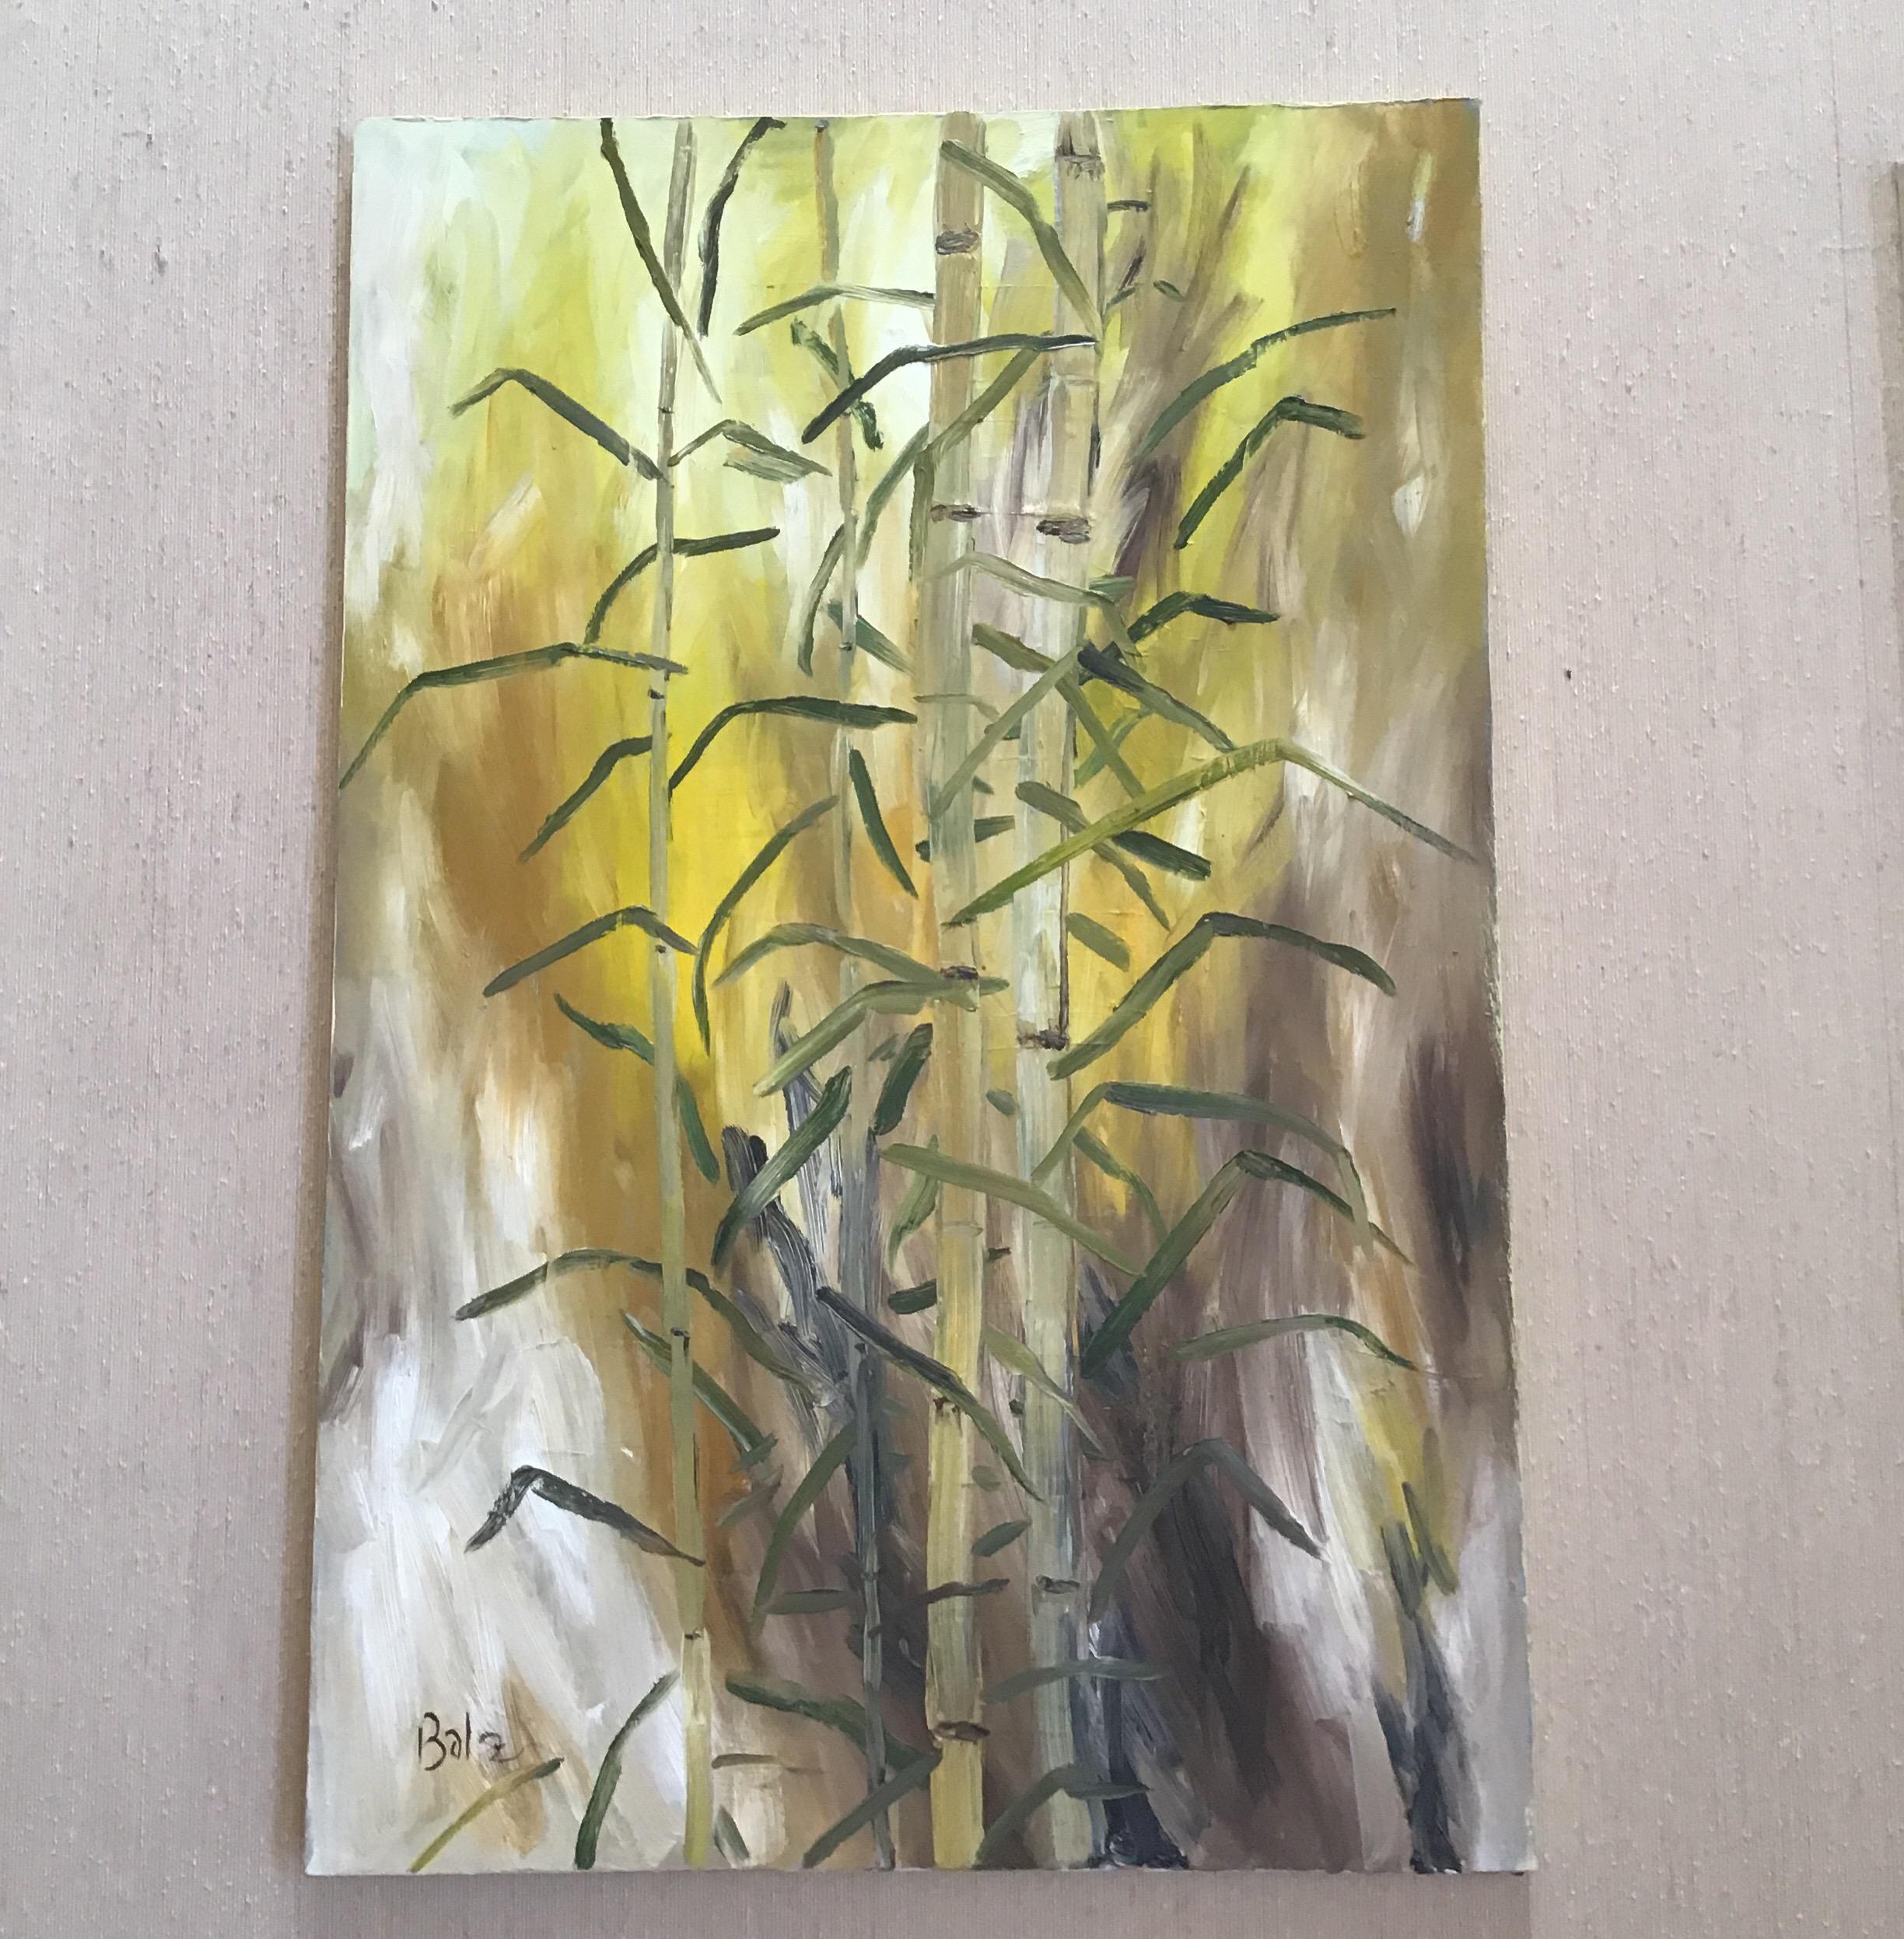 Oil on canvas of a stand of bamboo
Unframed